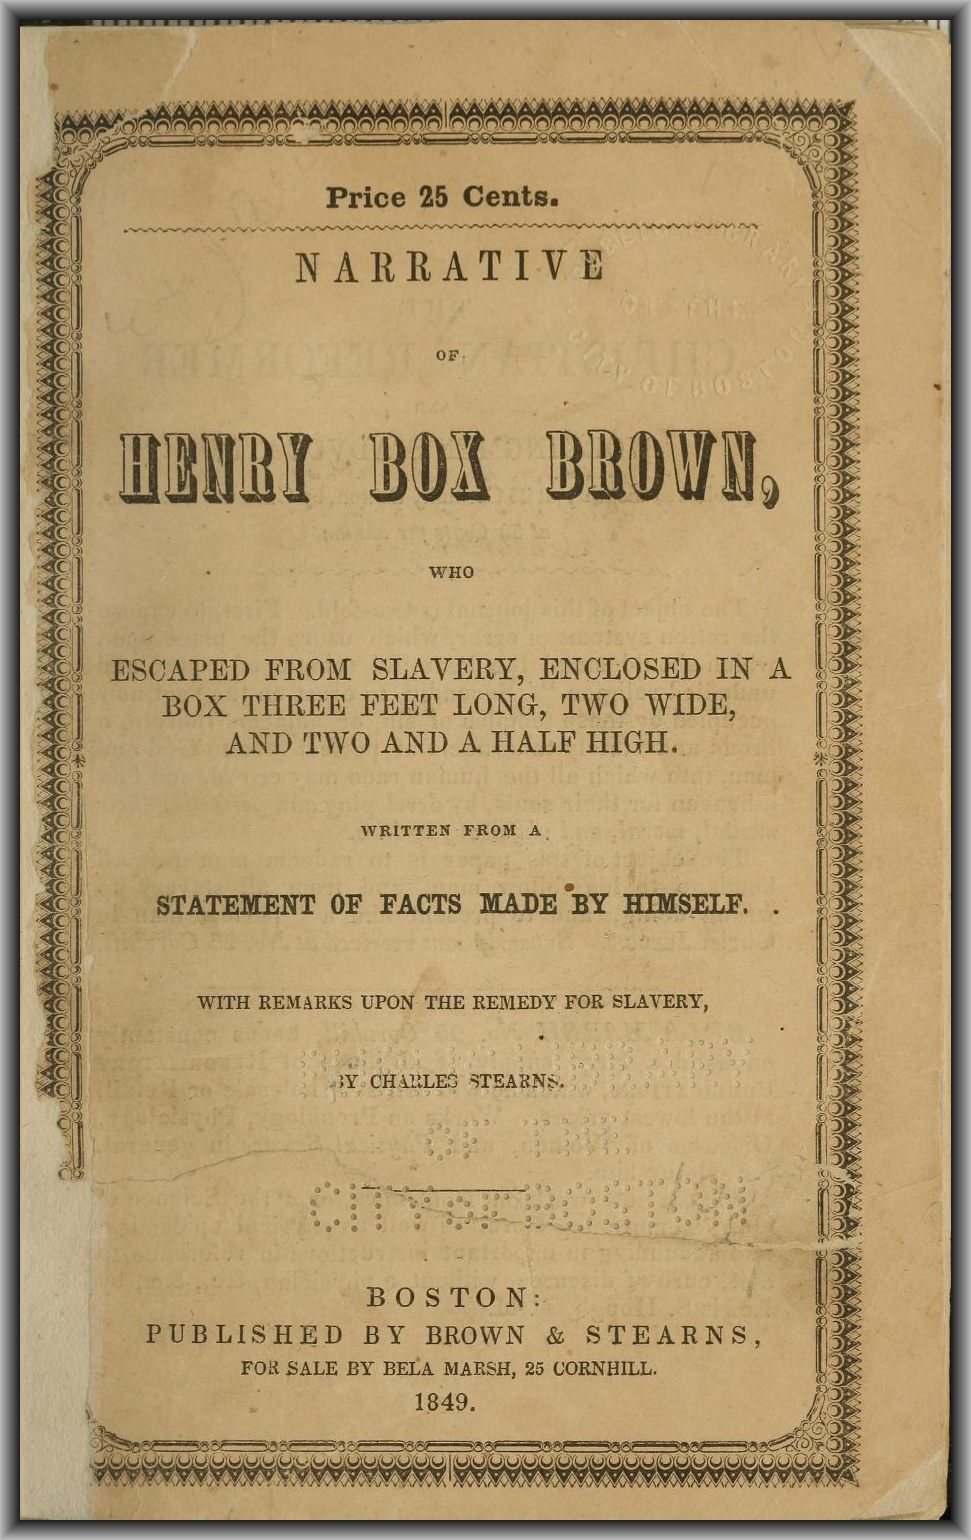 Narrative of Henry Box Brown&#10;Who Escaped from Slavery Enclosed in a Box 3 Feet Long and 2 Wide